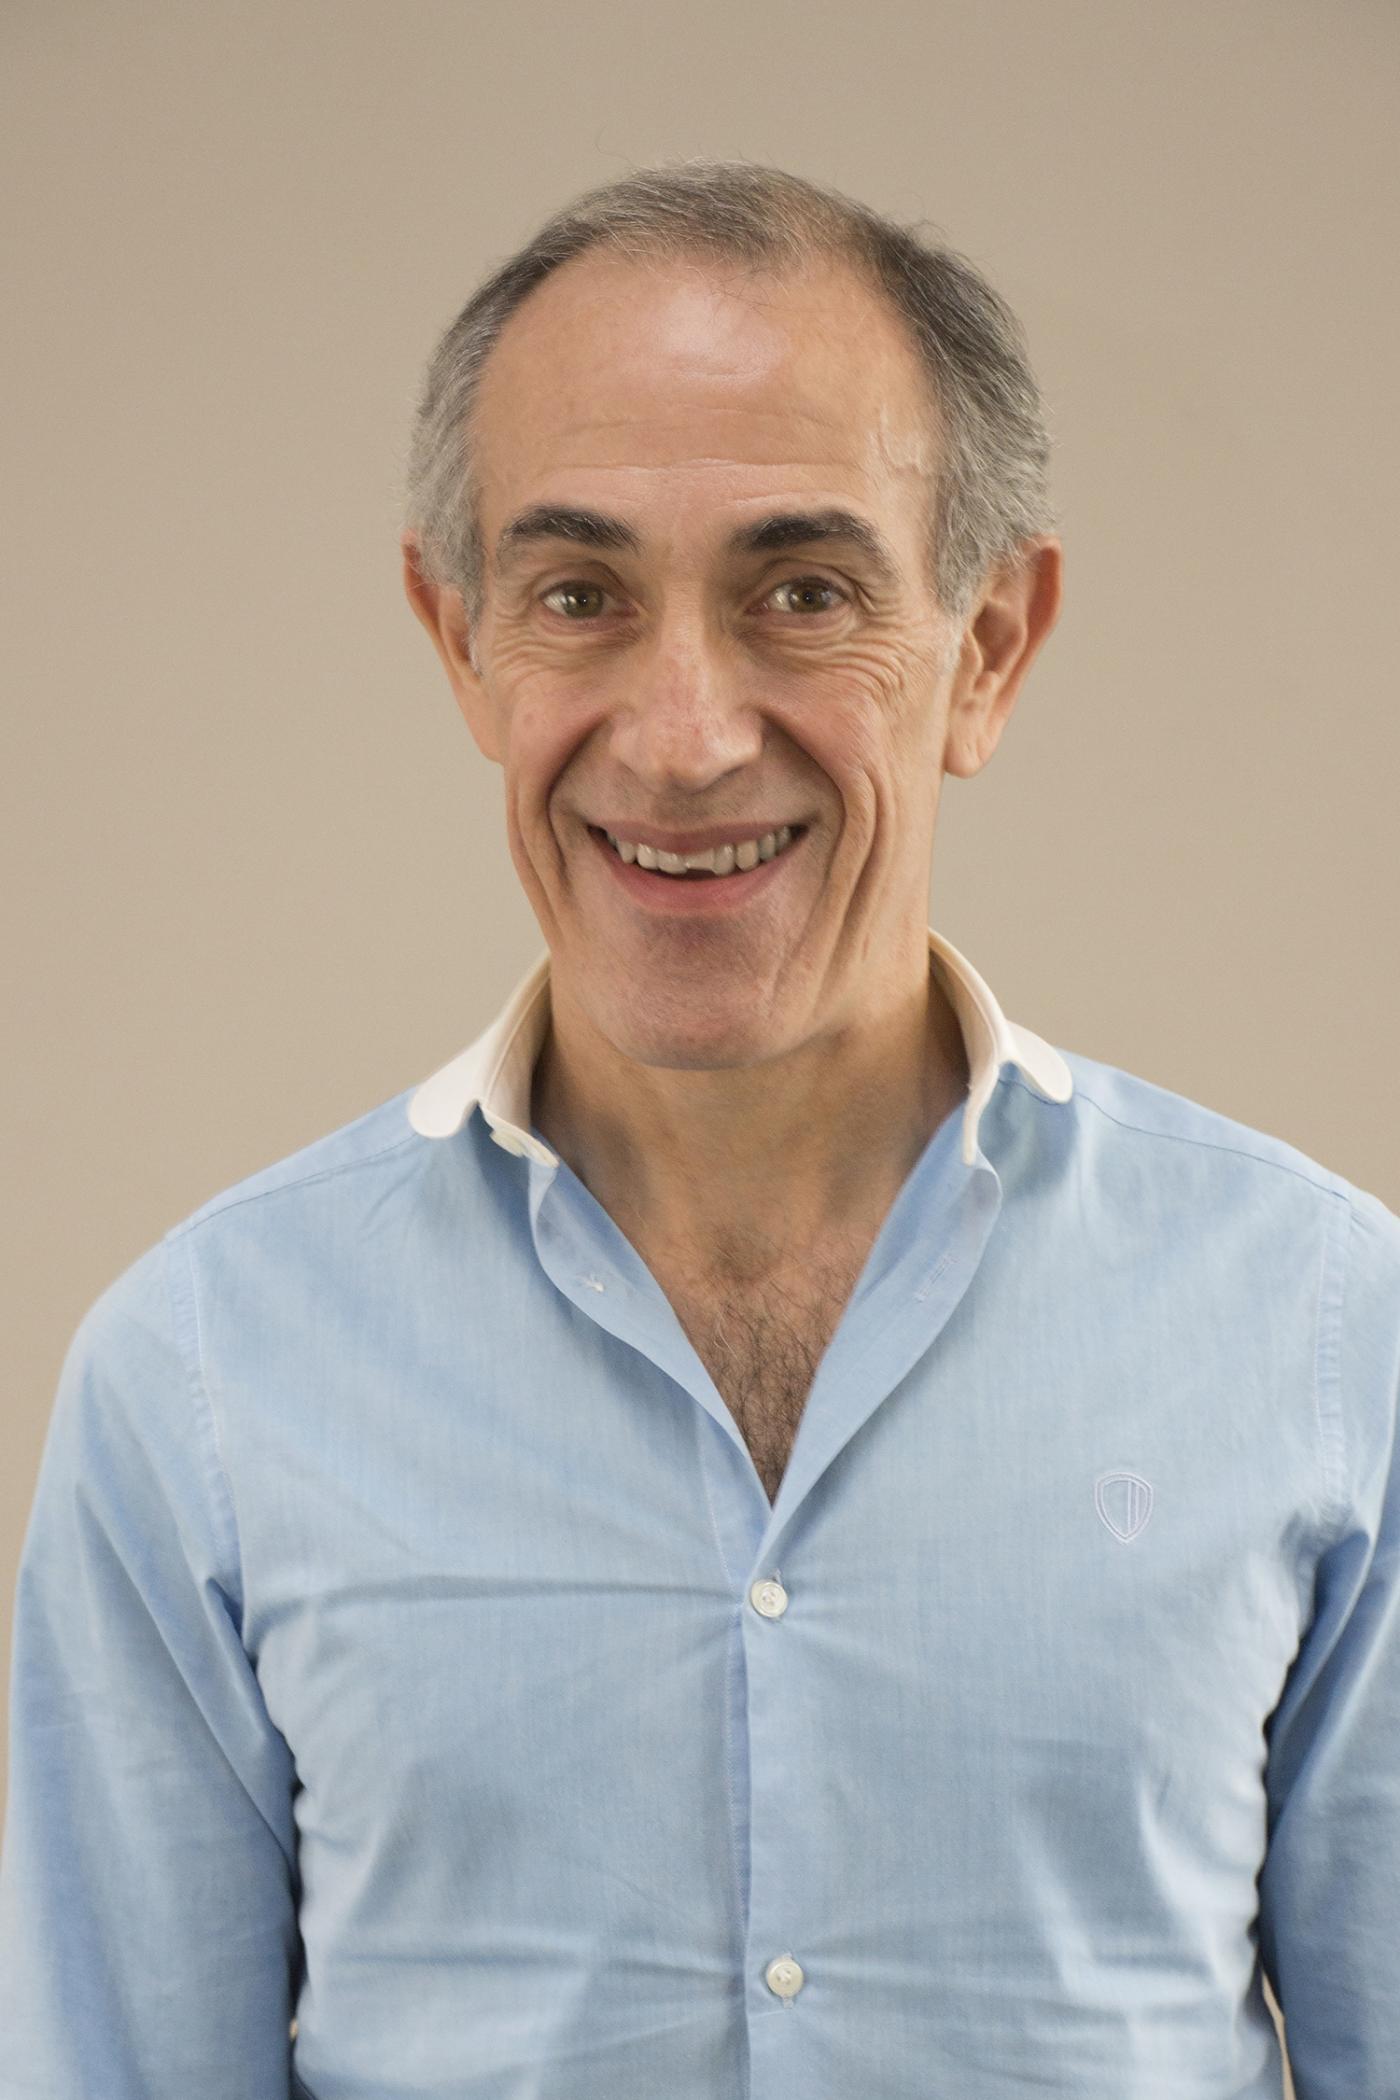 A man with short gray hair and wearing a blue button down shirt with a white collar.